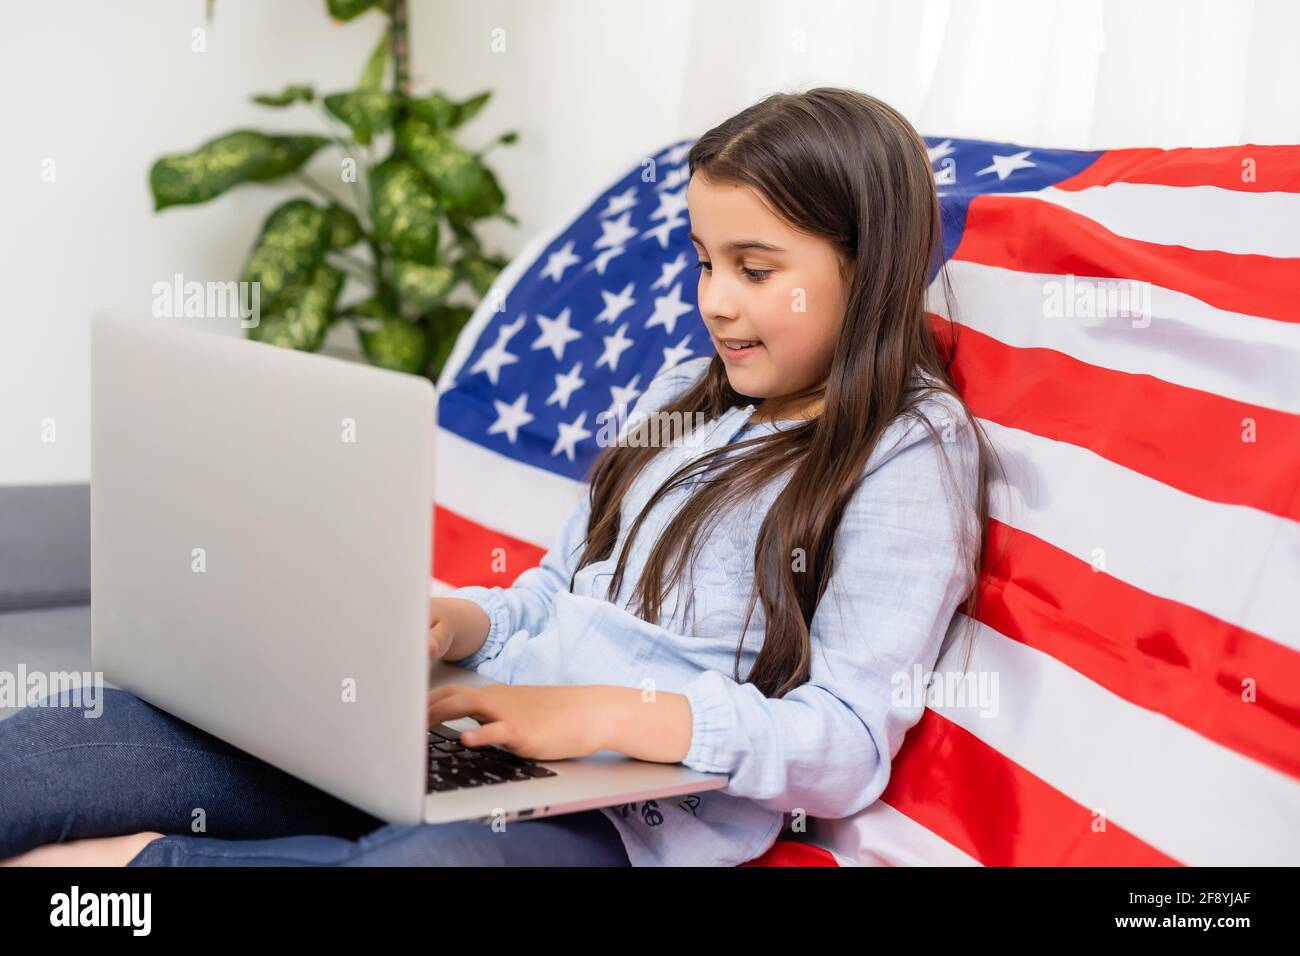 Back to online school education. Difficult to speak English. Kid doing homework on computer. Student studying on laptop over American flag. Tutor Stock Photo